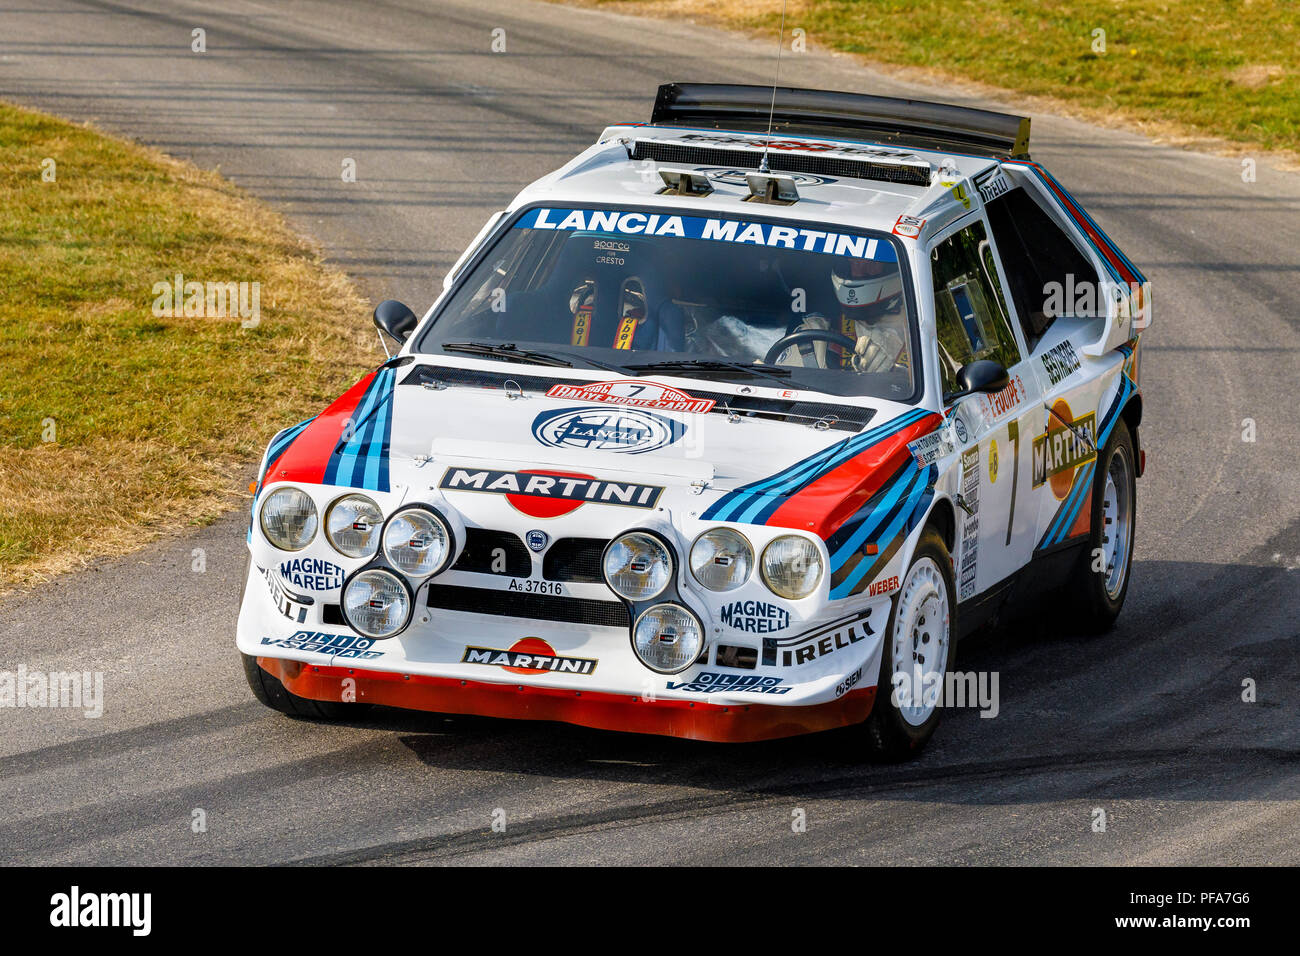 1986 Lancia Delta S4 Groupe B rally voiture avec chauffeur Andrew Beverley au Goodwood Festival of Speed 2018, Sussex, UK. Banque D'Images